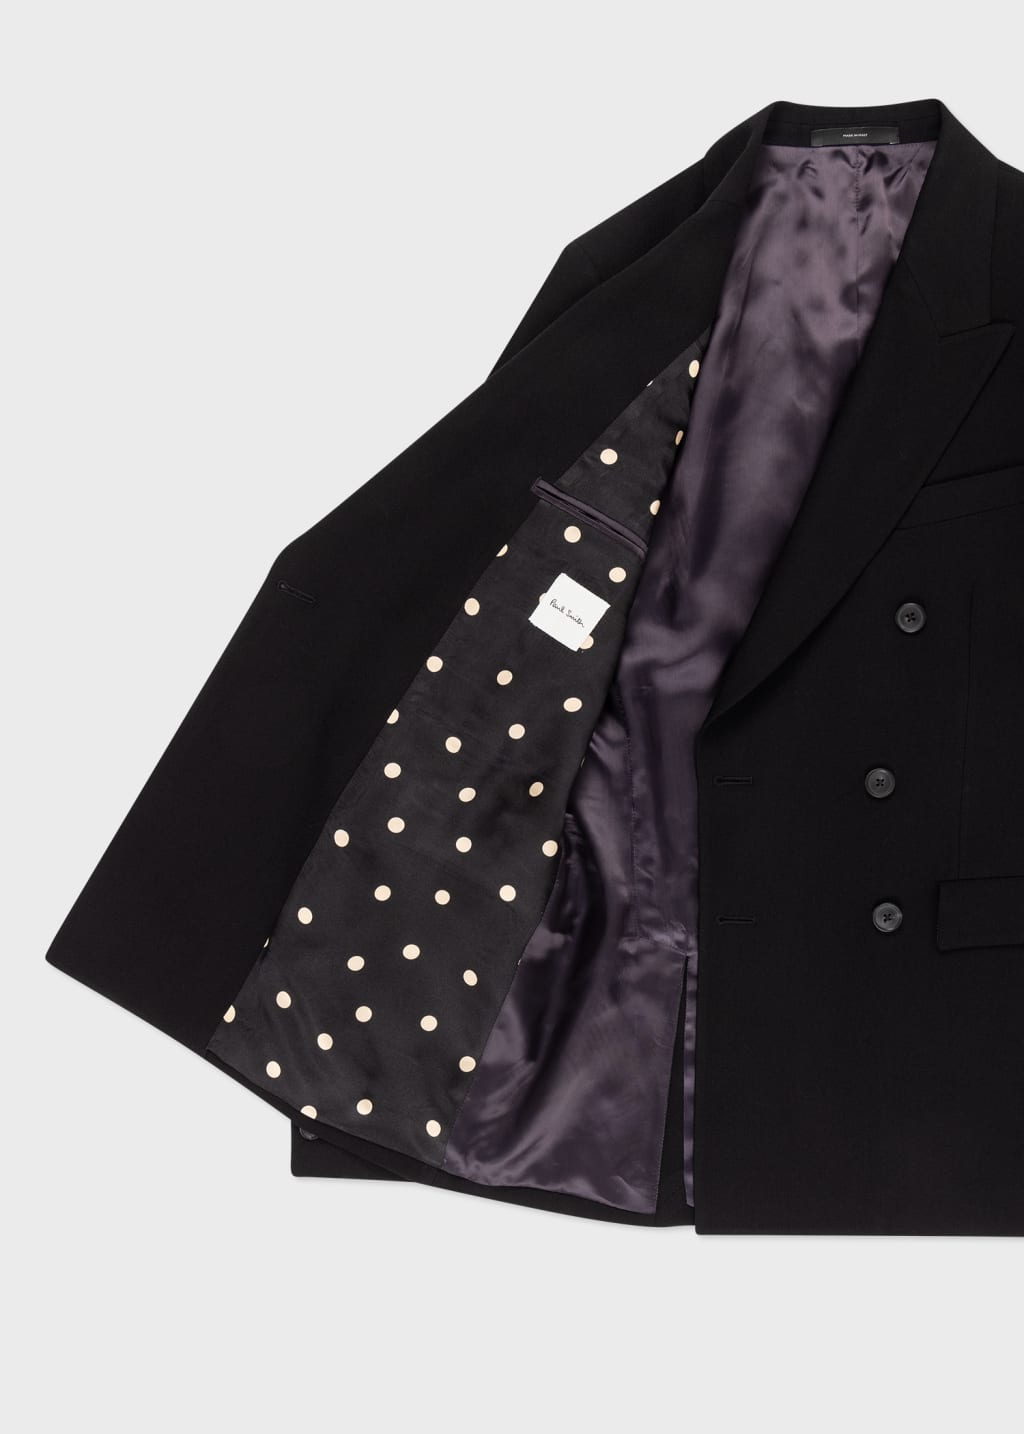 Product View -Men's Black Wool Double-Breasted Suit by Paul Smith